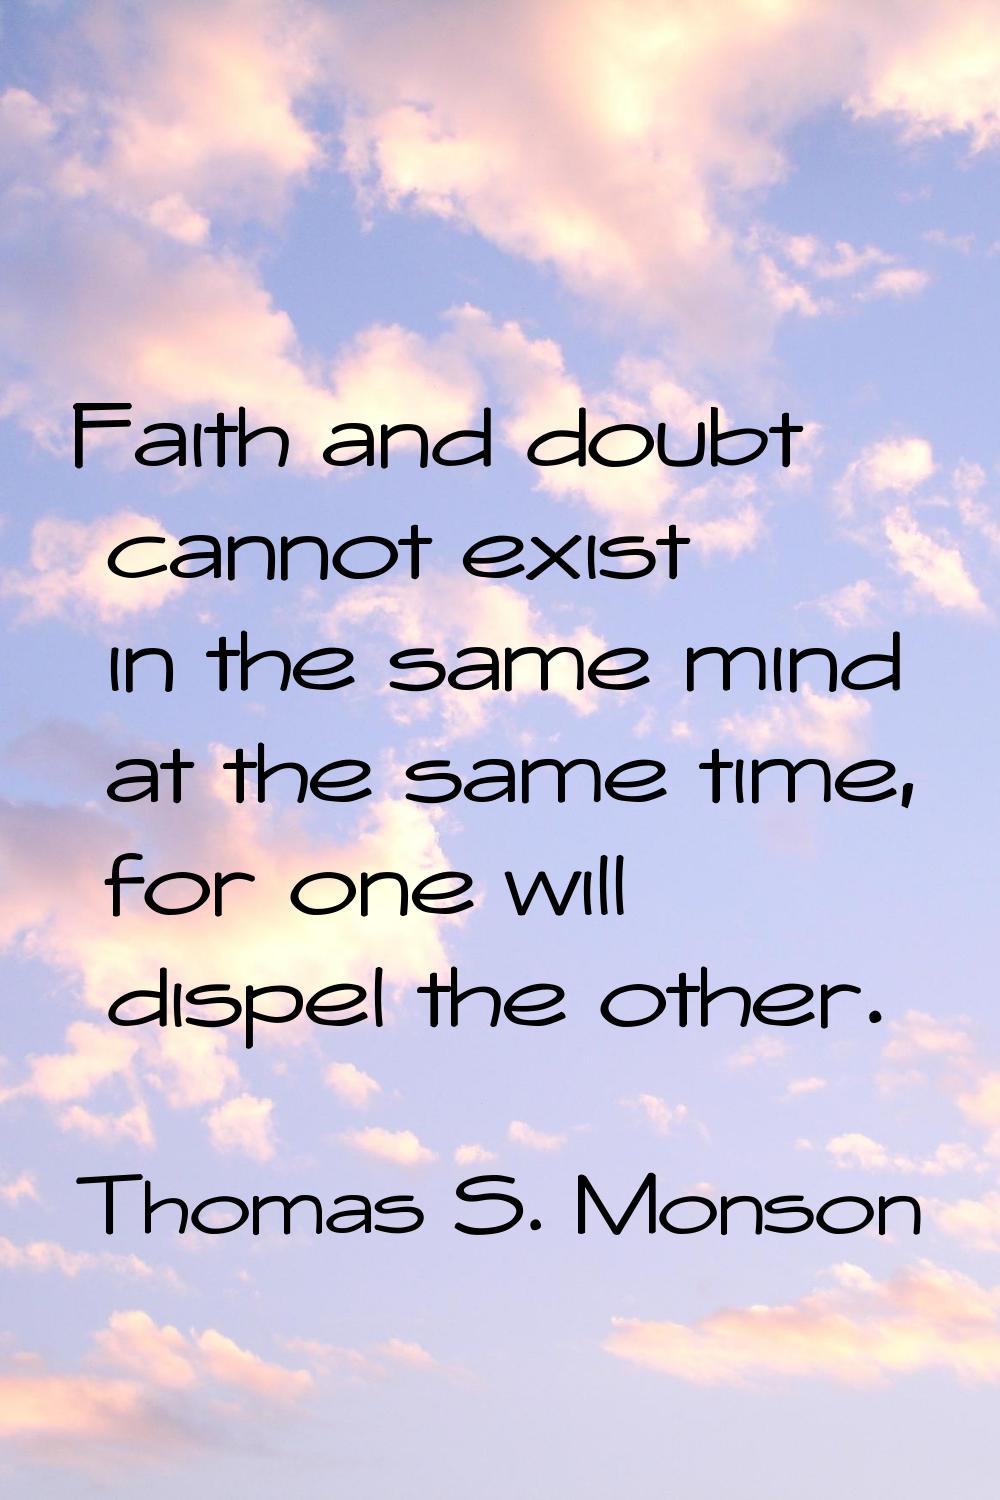 Faith and doubt cannot exist in the same mind at the same time, for one will dispel the other.